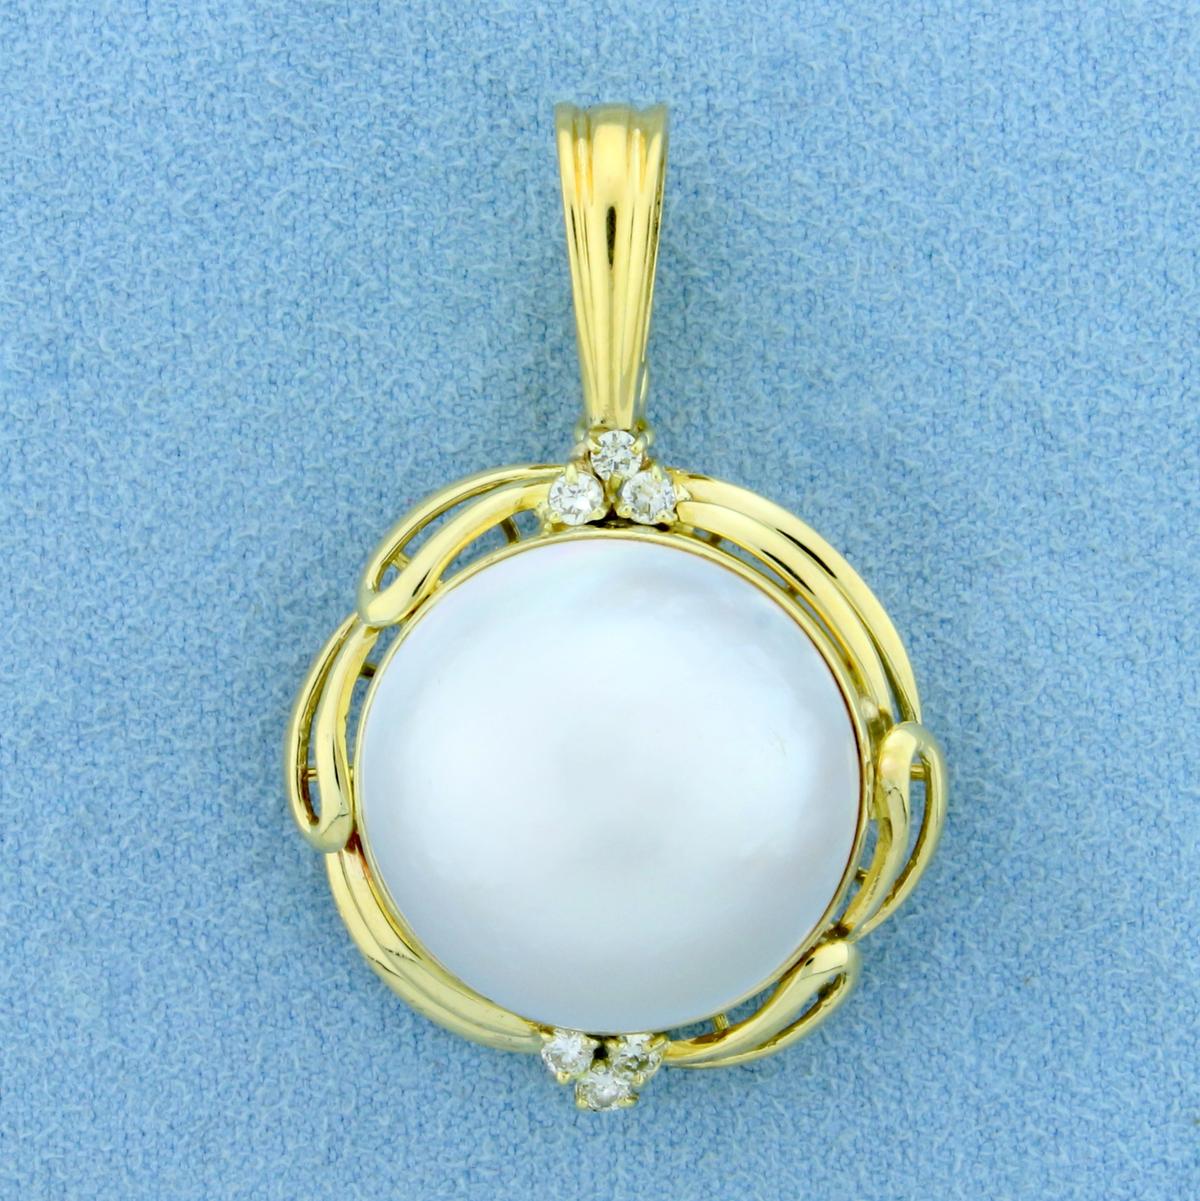 Large Mabe Pearl And Diamond Statement Pendant In 18k Yellow Gold